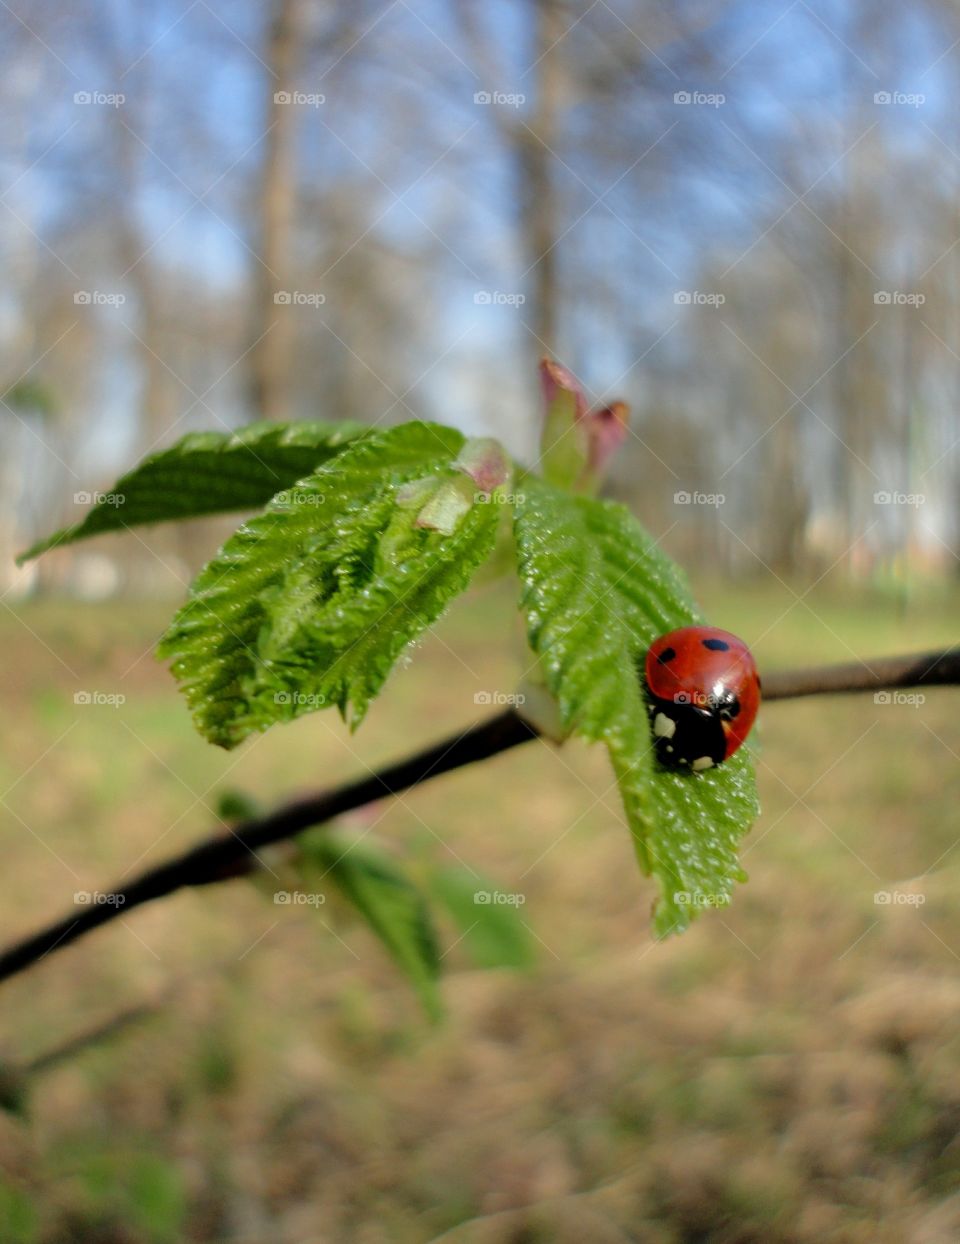 ladybug on a young green leaf spring time